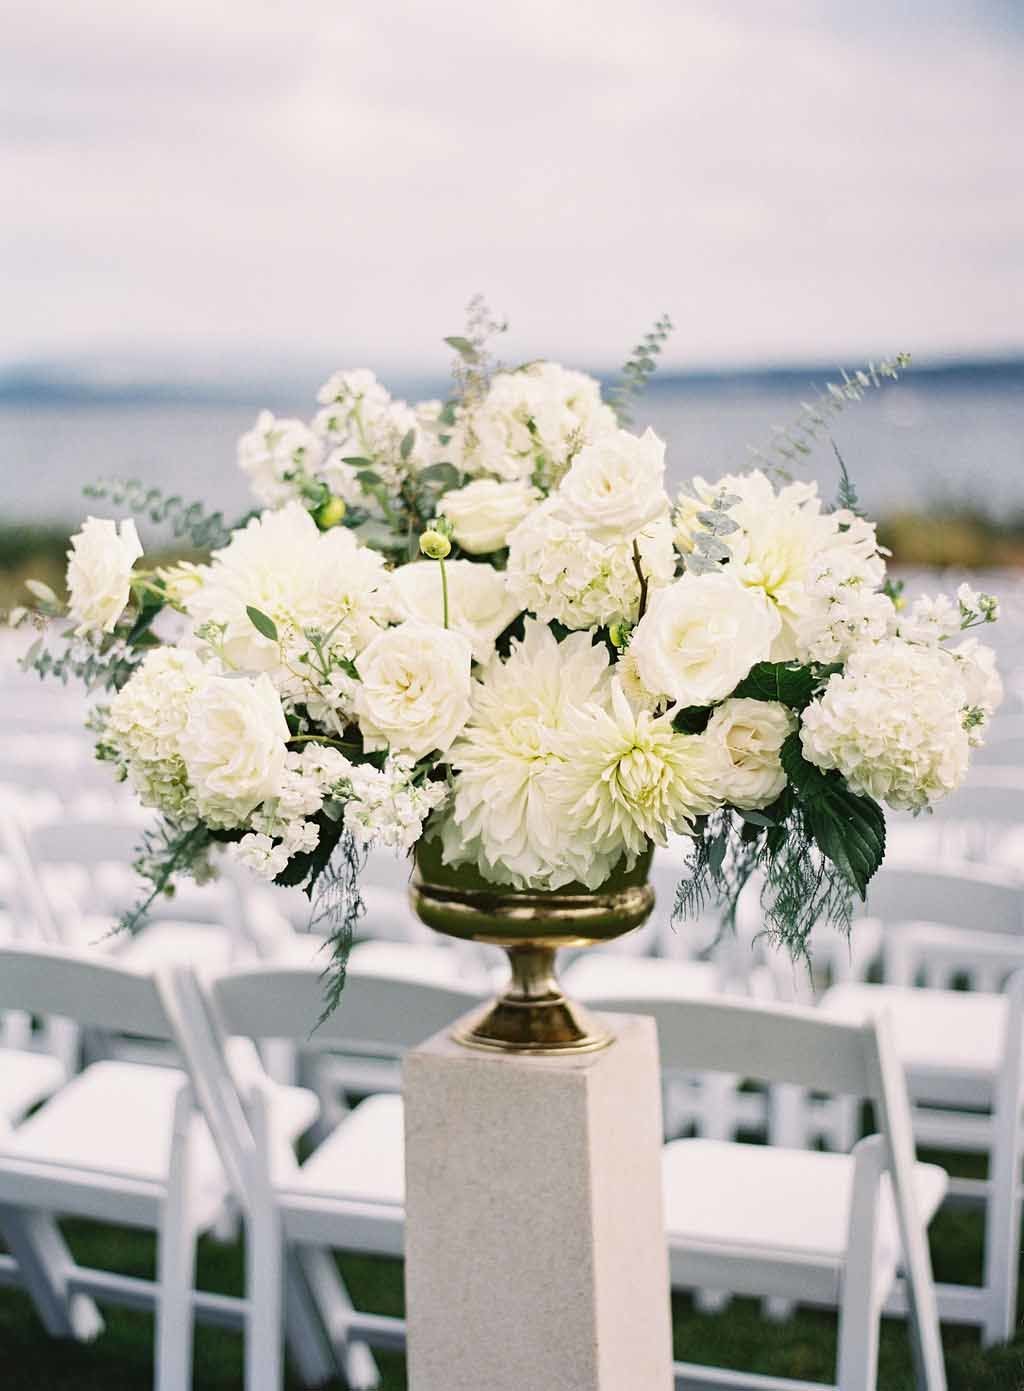 large white flower arrangement in gold urn on top of white stone pedestal for wedding ceremony